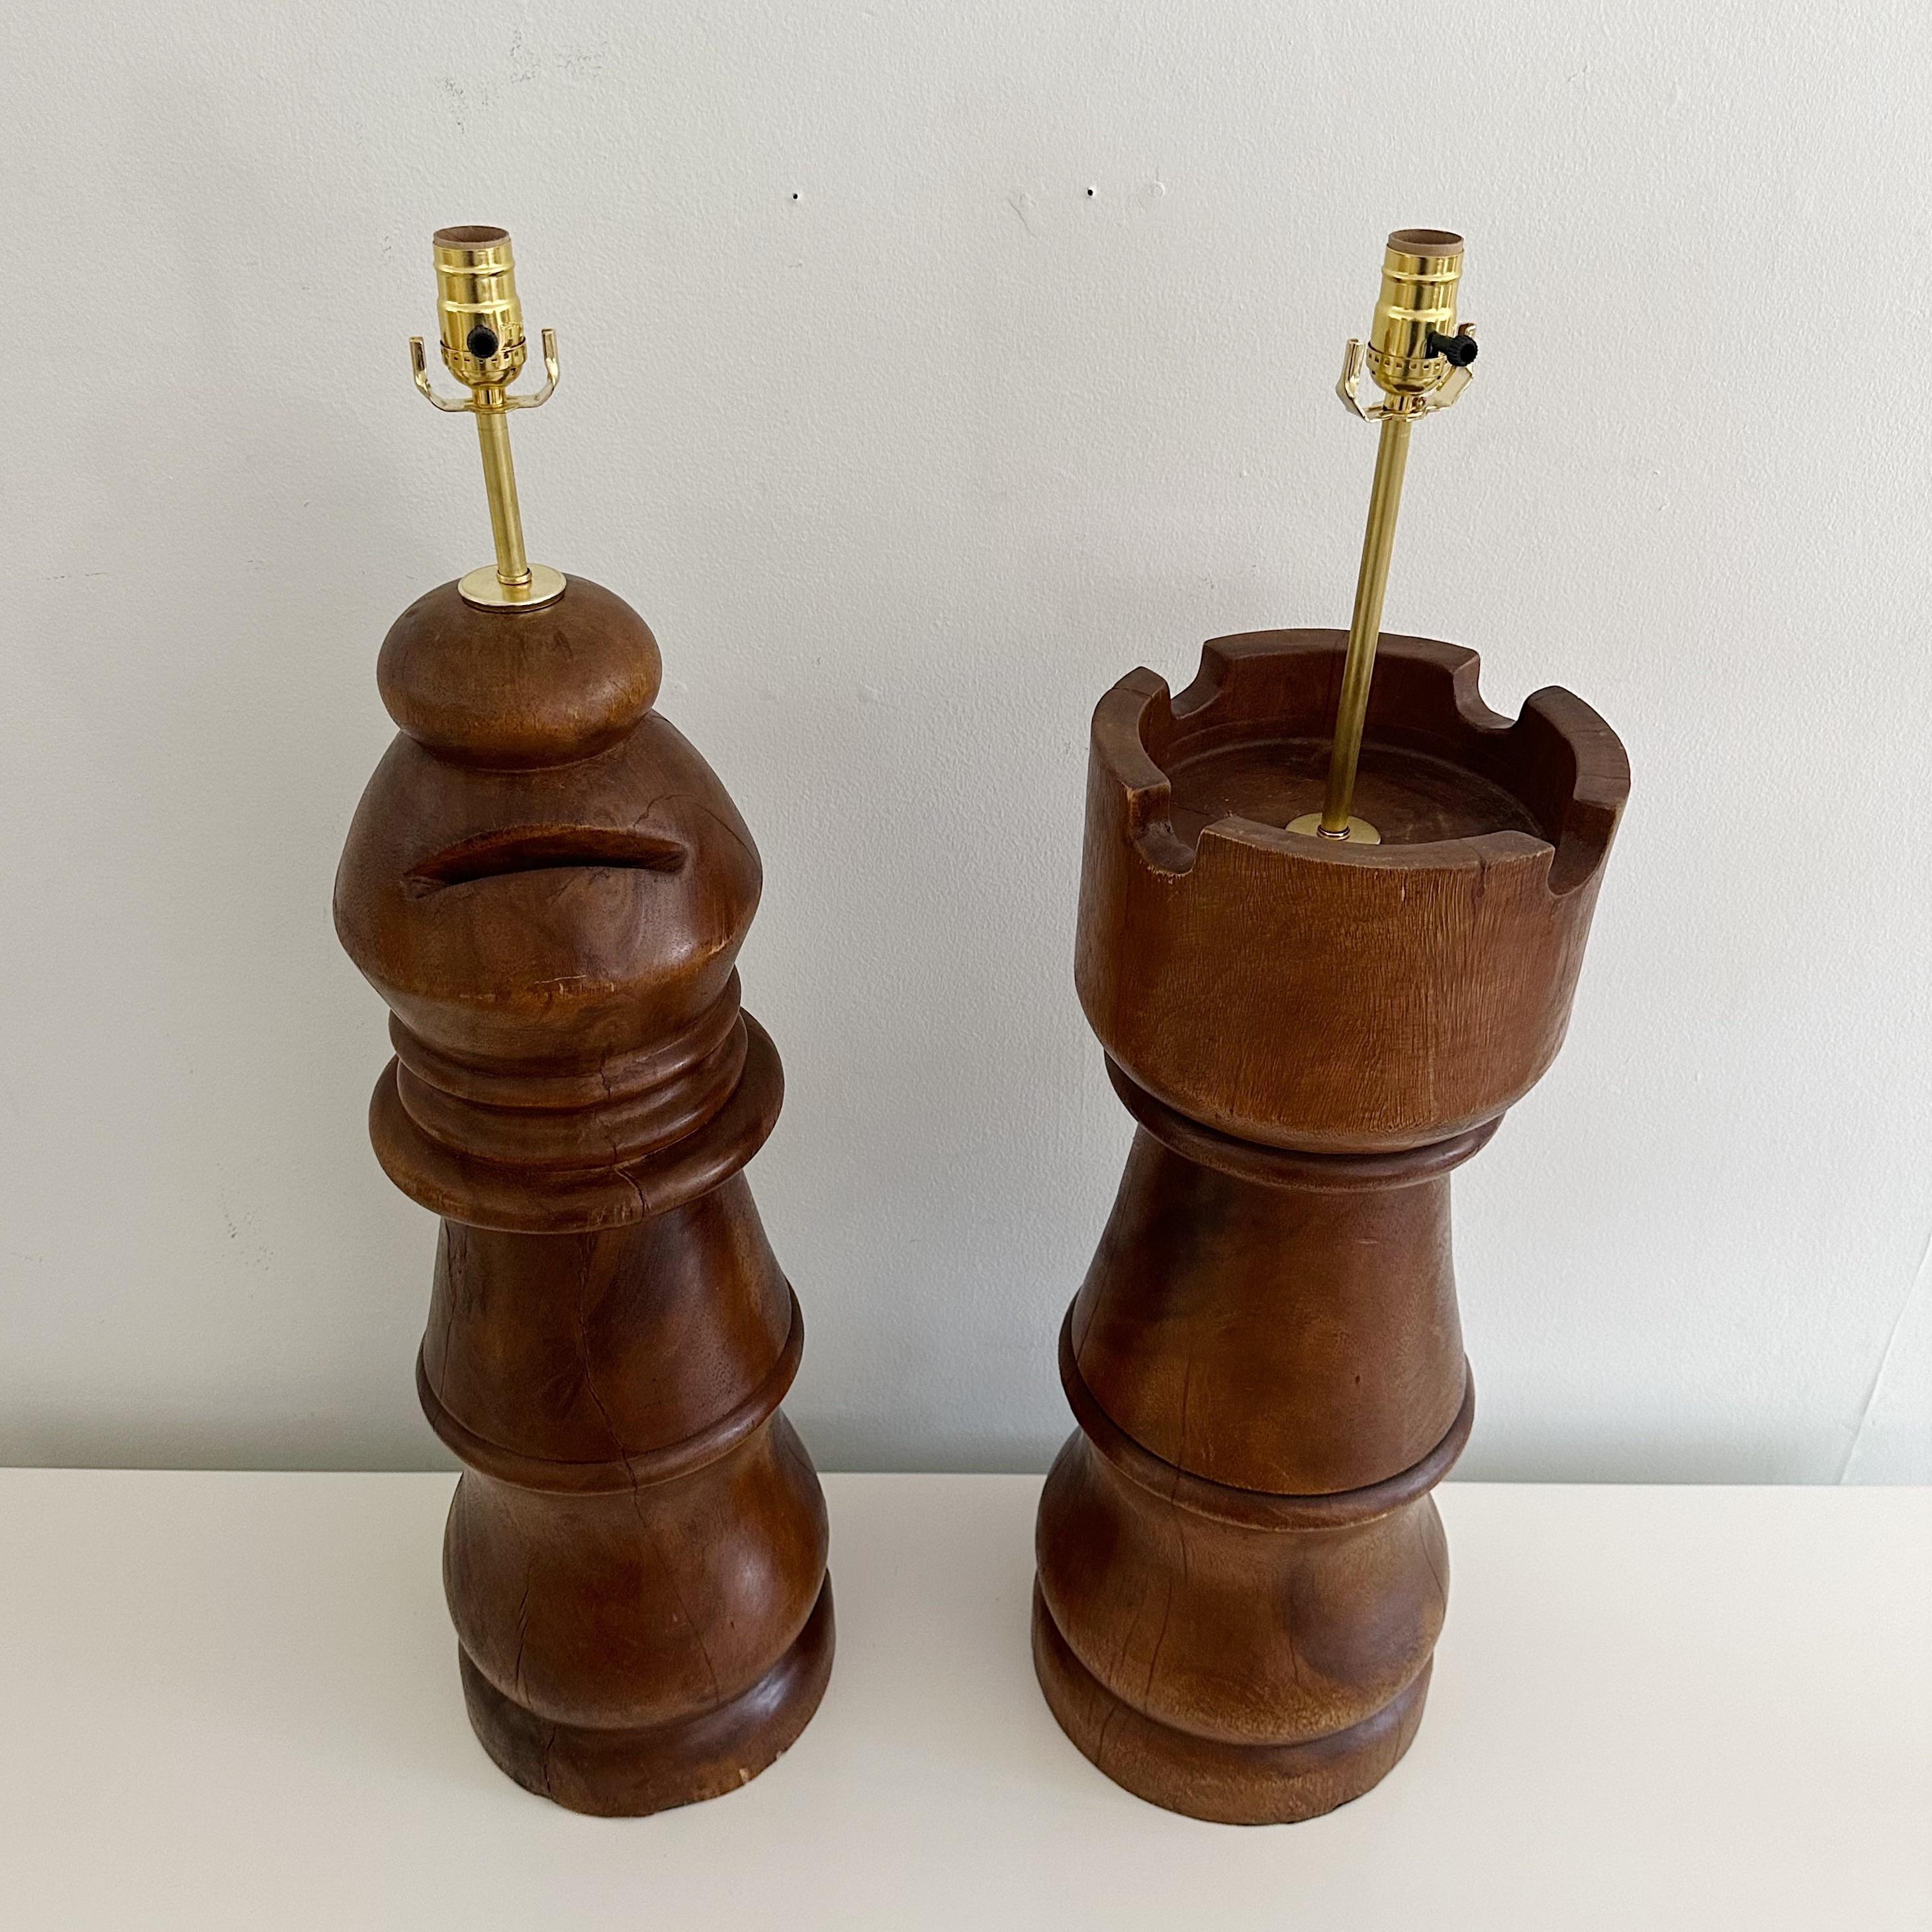 Impressive Pair of Solid Wood Chess Piece Lamps - Rook and Bishop

Elevate your interior décor with this remarkable pair of solid wood chess piece lamps, featuring an intricately crafted rook and bishop. These exquisite lamps, originating from the